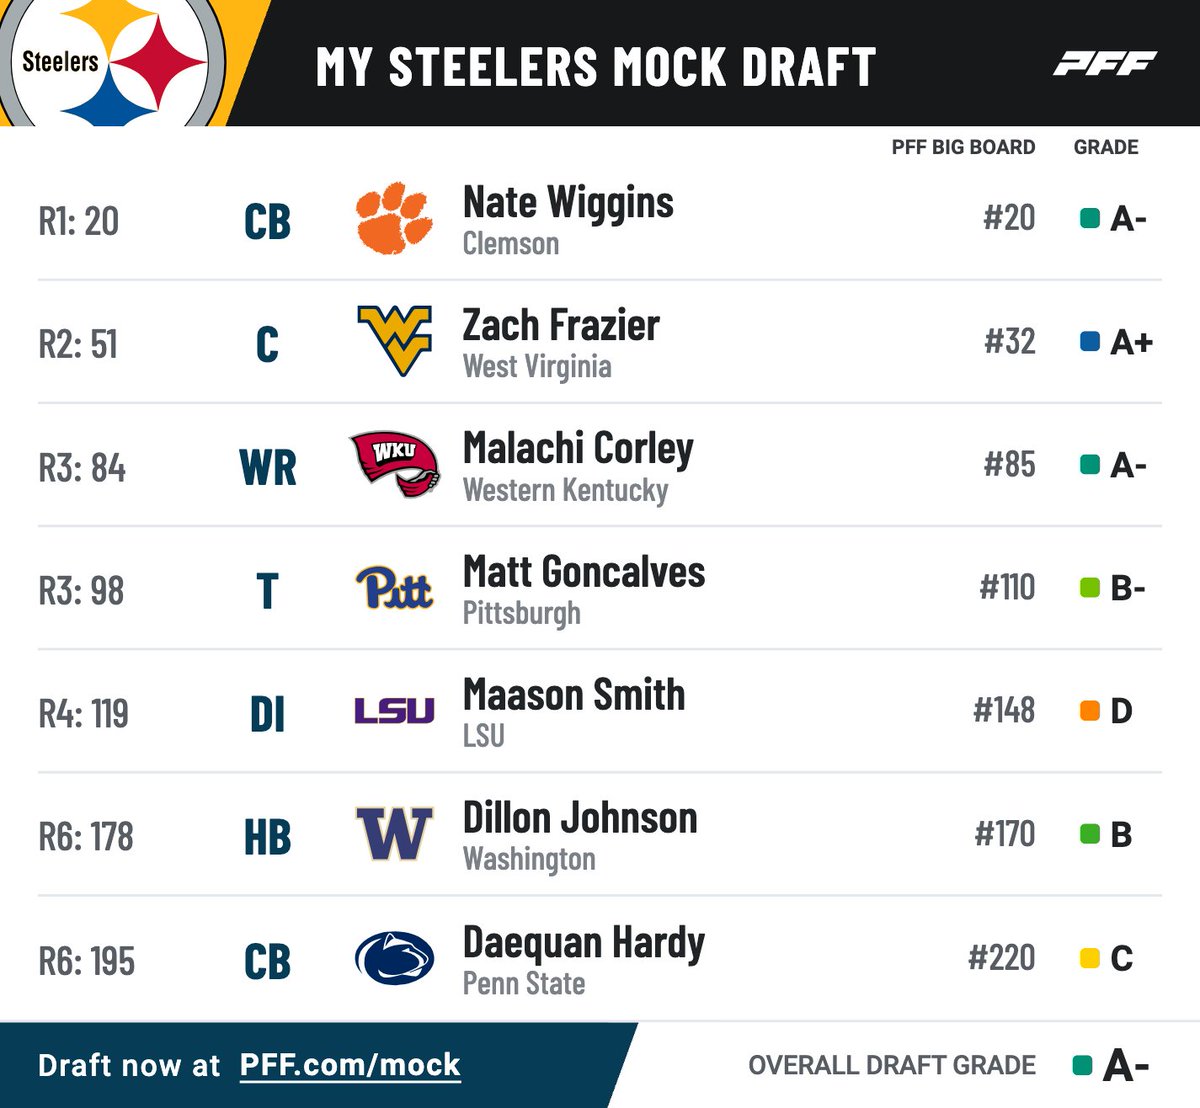 A different idea with the Steelers going CB with the 20th overall pick but wouldn't be mad if the draft went this way.